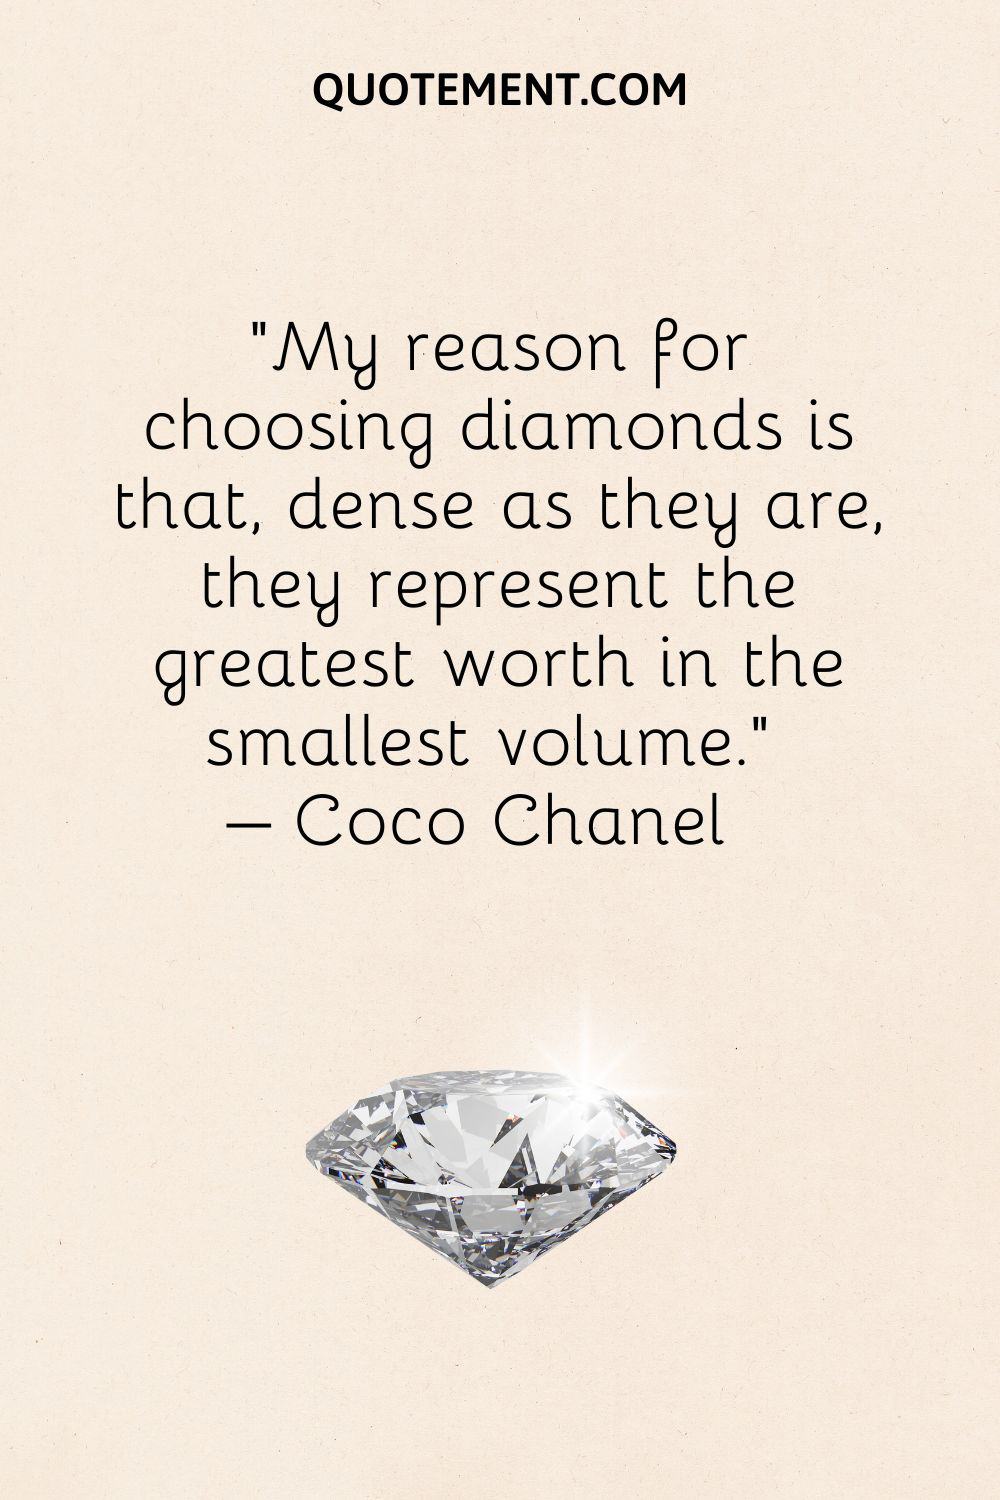 My reason for choosing diamonds is that, dense as they are, they represent the greatest worth in the smallest volume